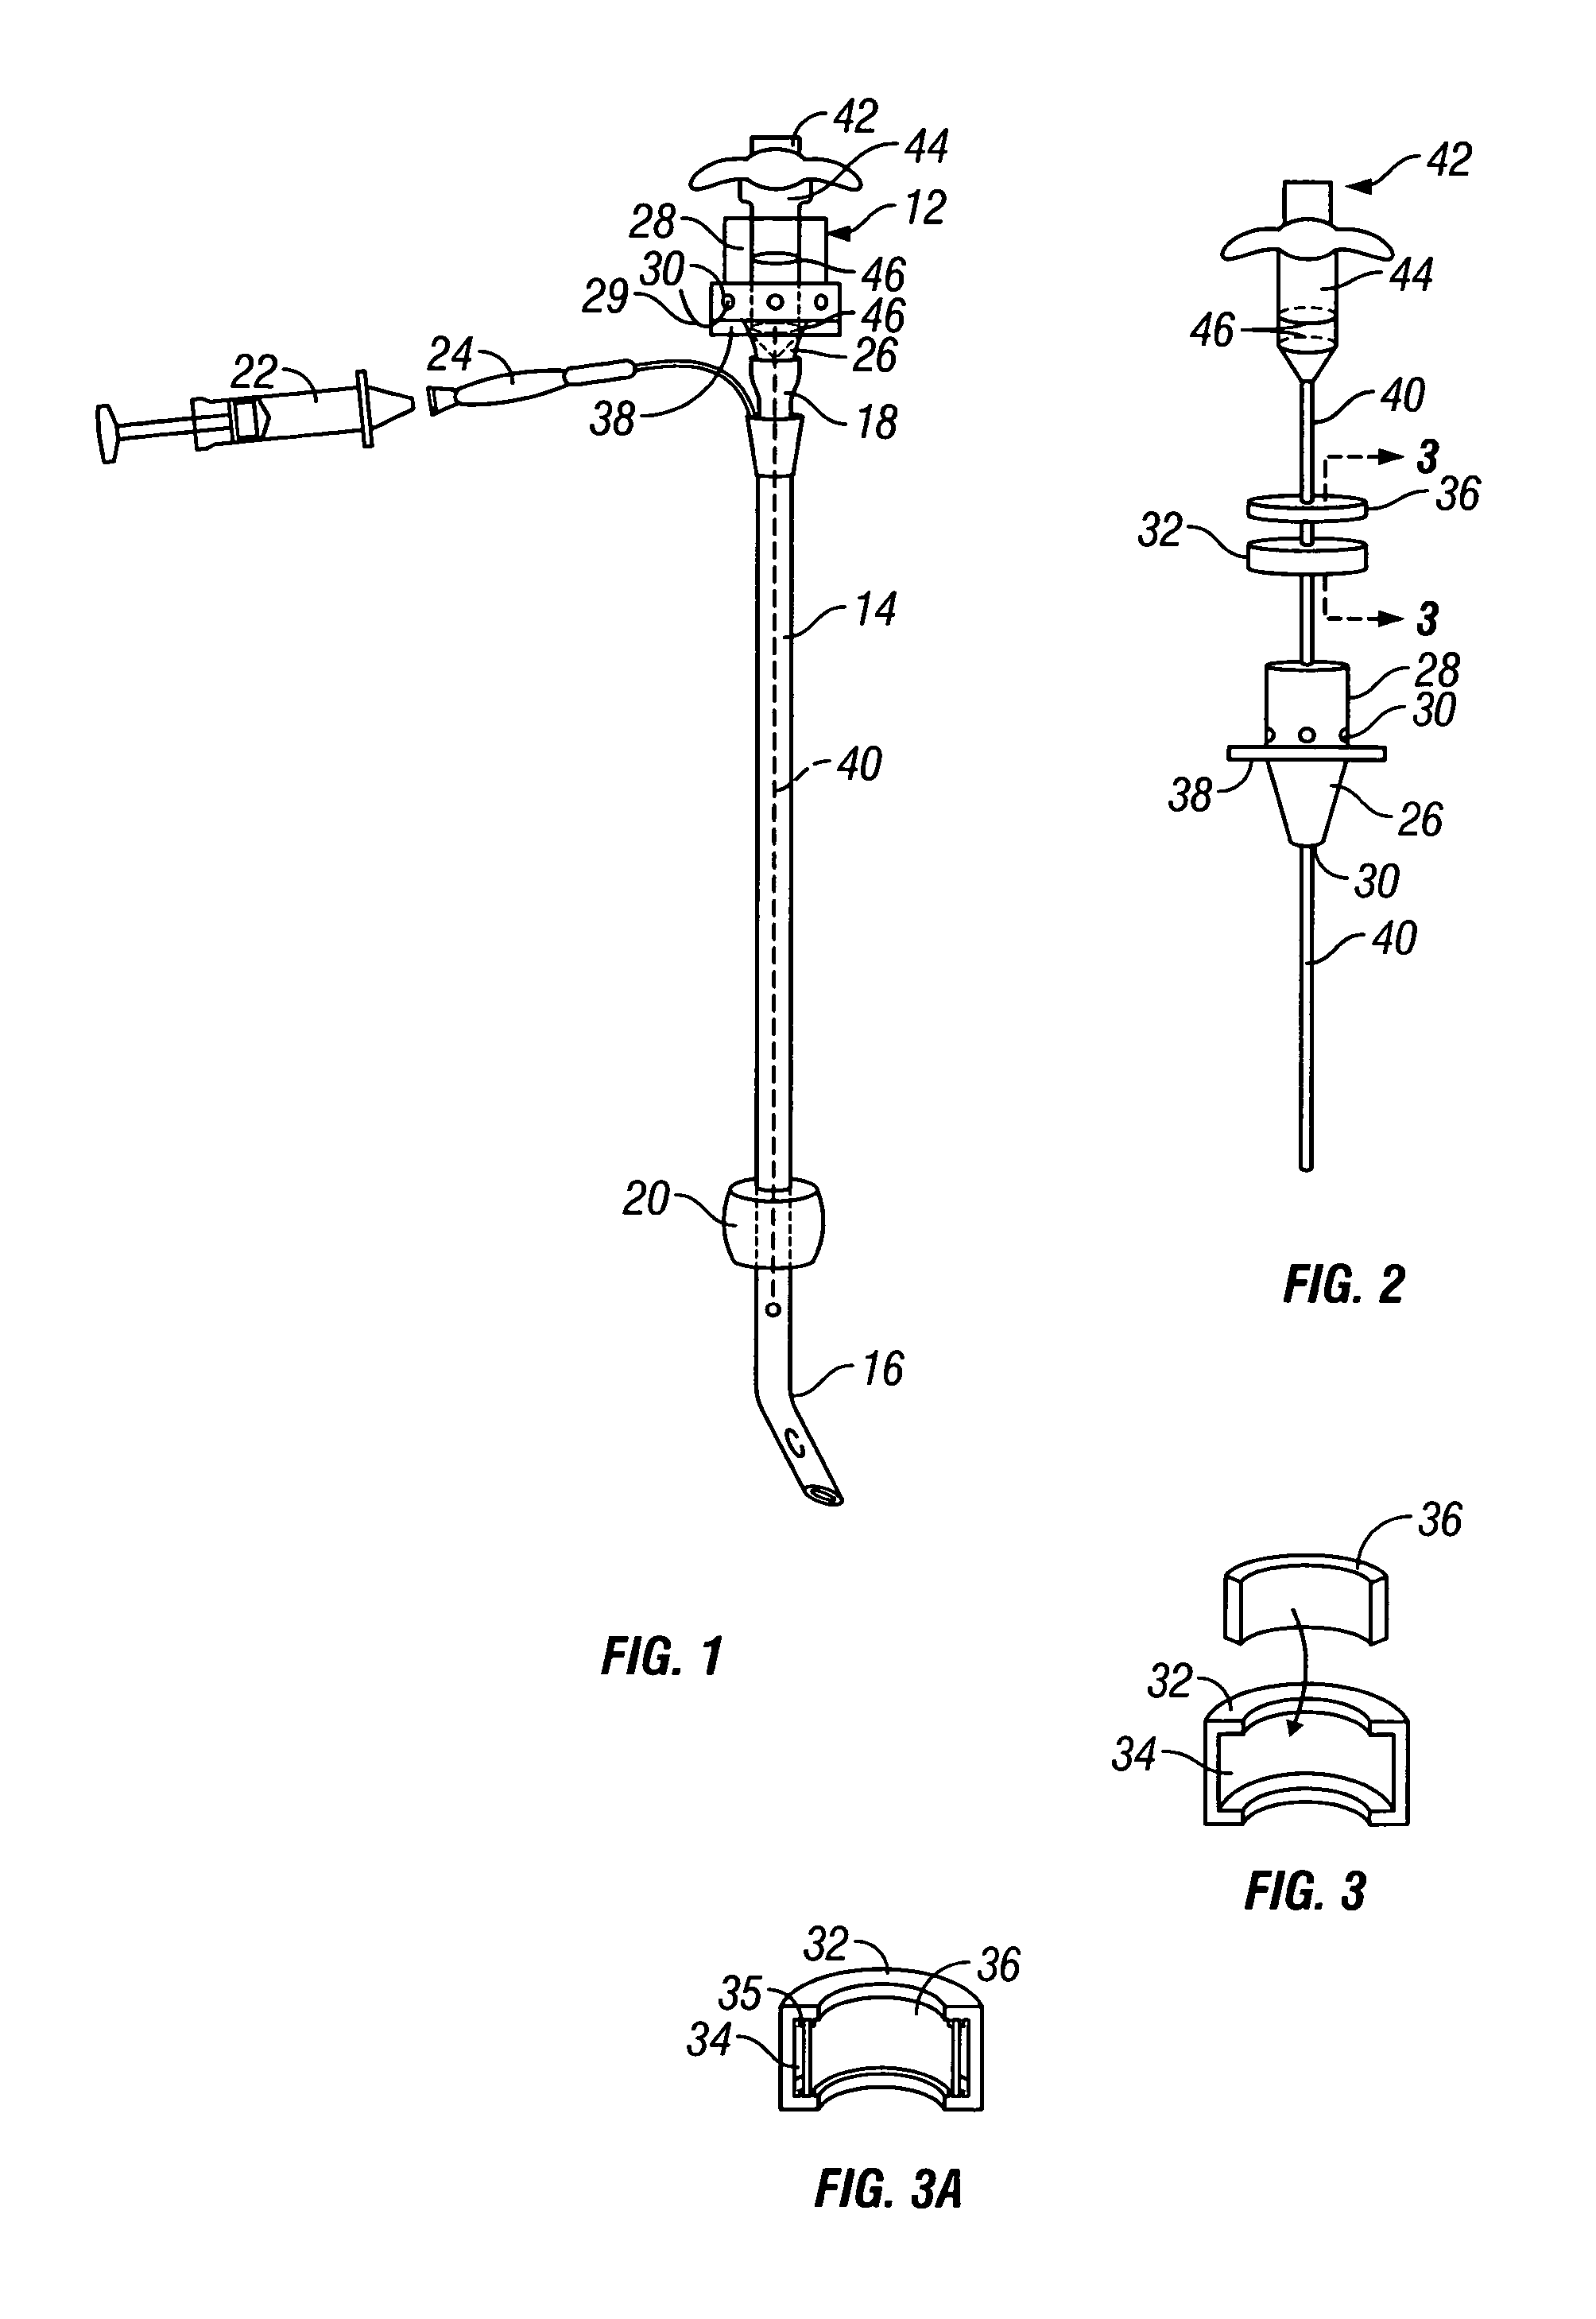 Endotracheal tube system and method of use